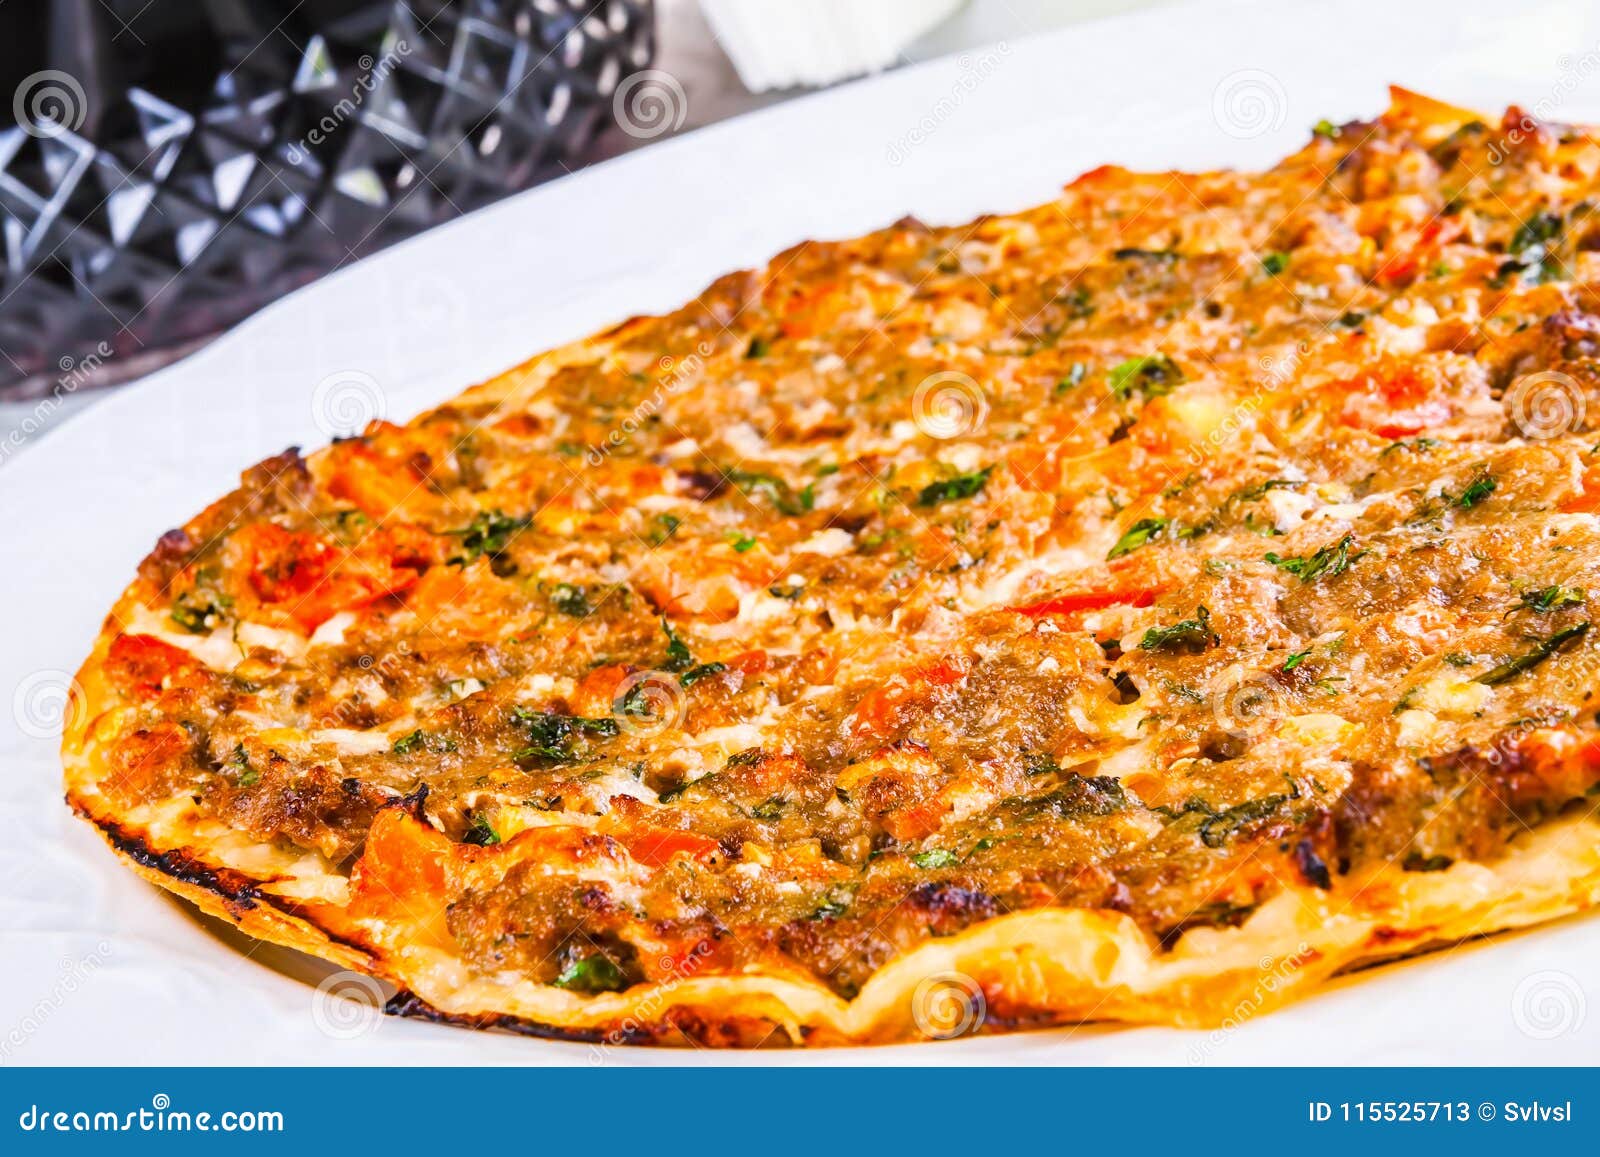 Lahmacun. Armenian Flat Bread Stuffed with Meat Stock Image - Image of ...